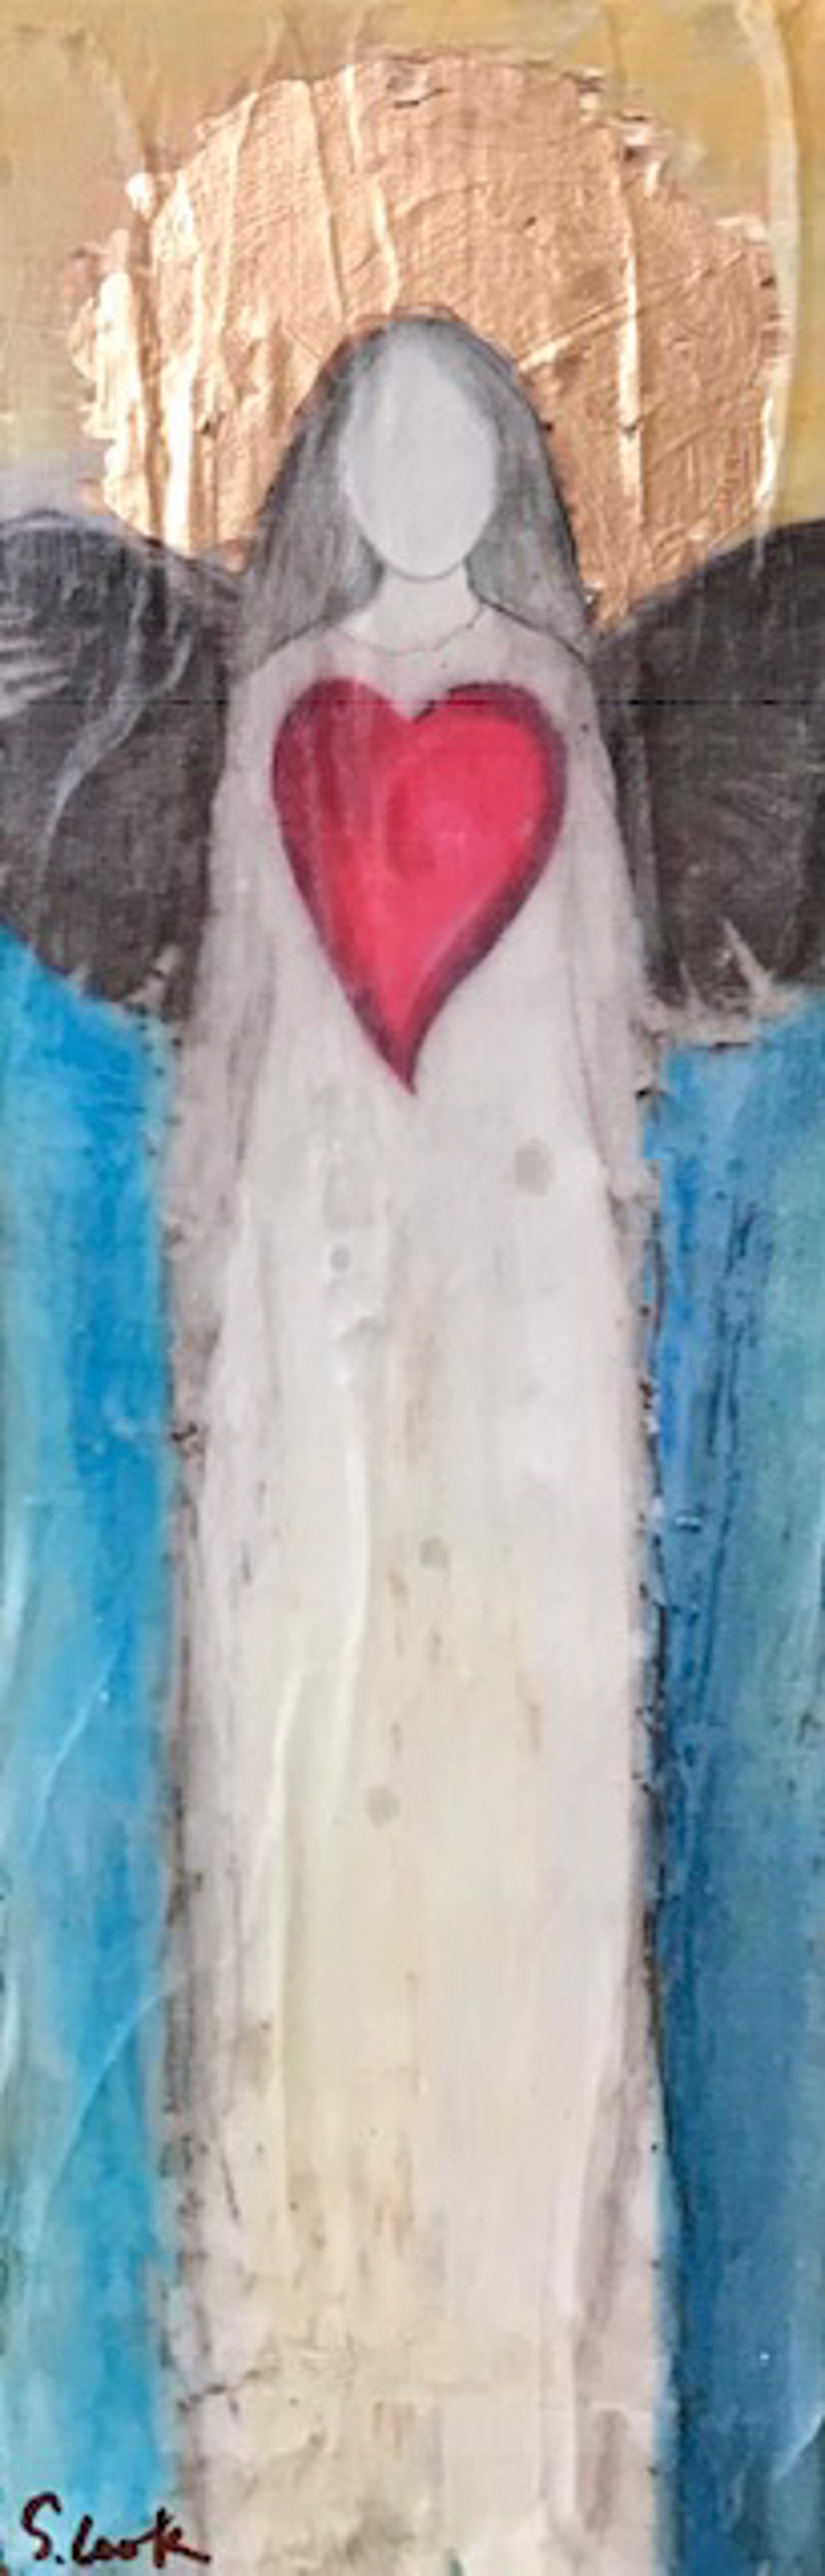 Big Heart Angel by Sherry Cook